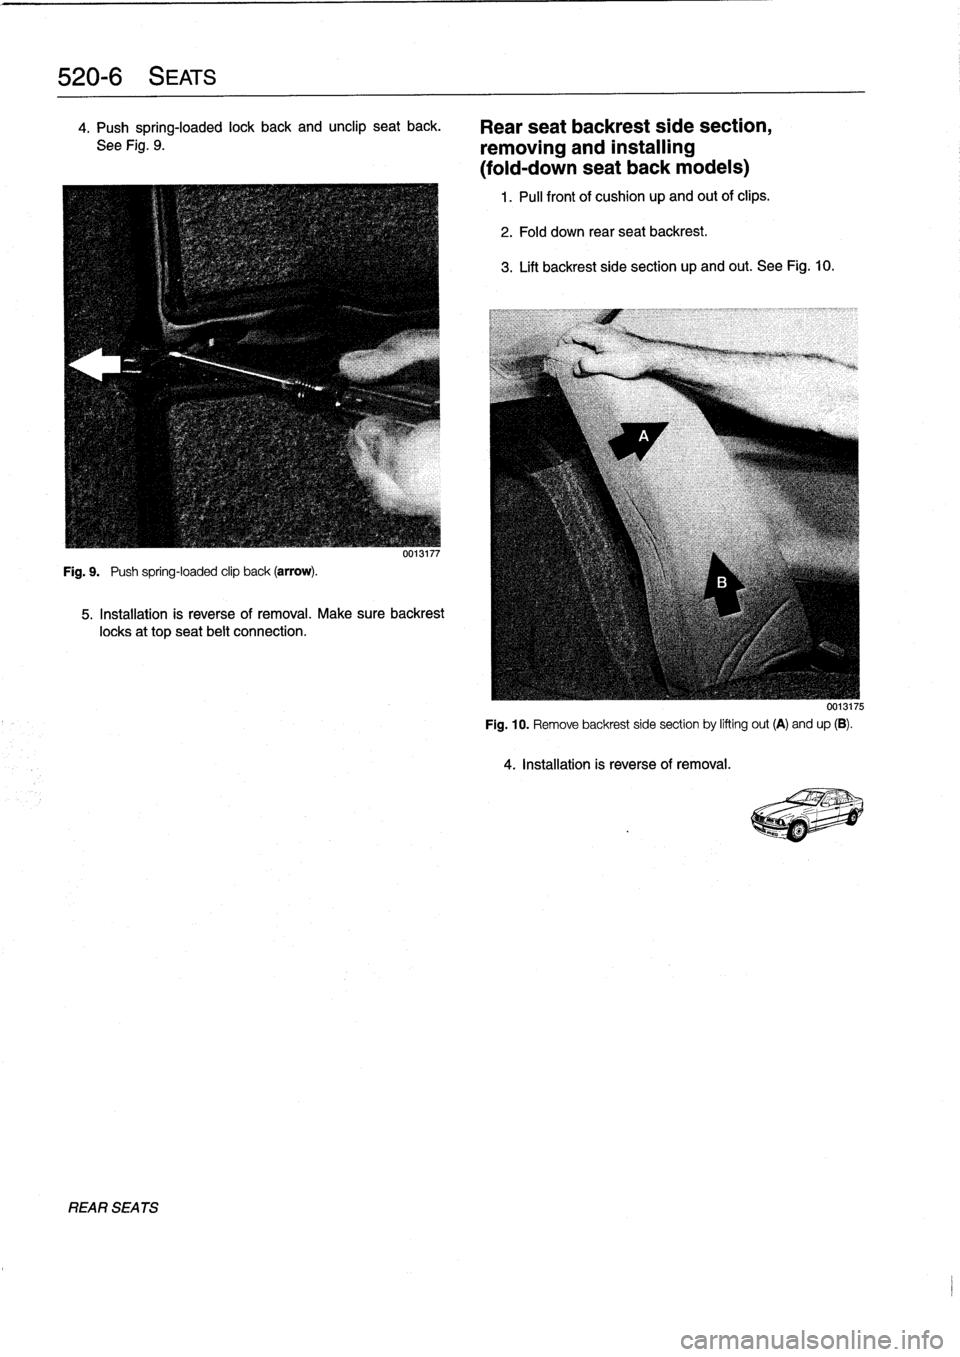 BMW 325i 1996 E36 Workshop Manual 
520-
6
SEATS

4
.
Push
spring-loaded
lock
back
and
unclip
seat
back
.

See
Fig
.
9
.

Fig
.
9
.

	

Push
spring-loaded
clip
back
(arrow)
.

UU13117

5
.
Installation
is
reverse
of
removal
.
Make
sure